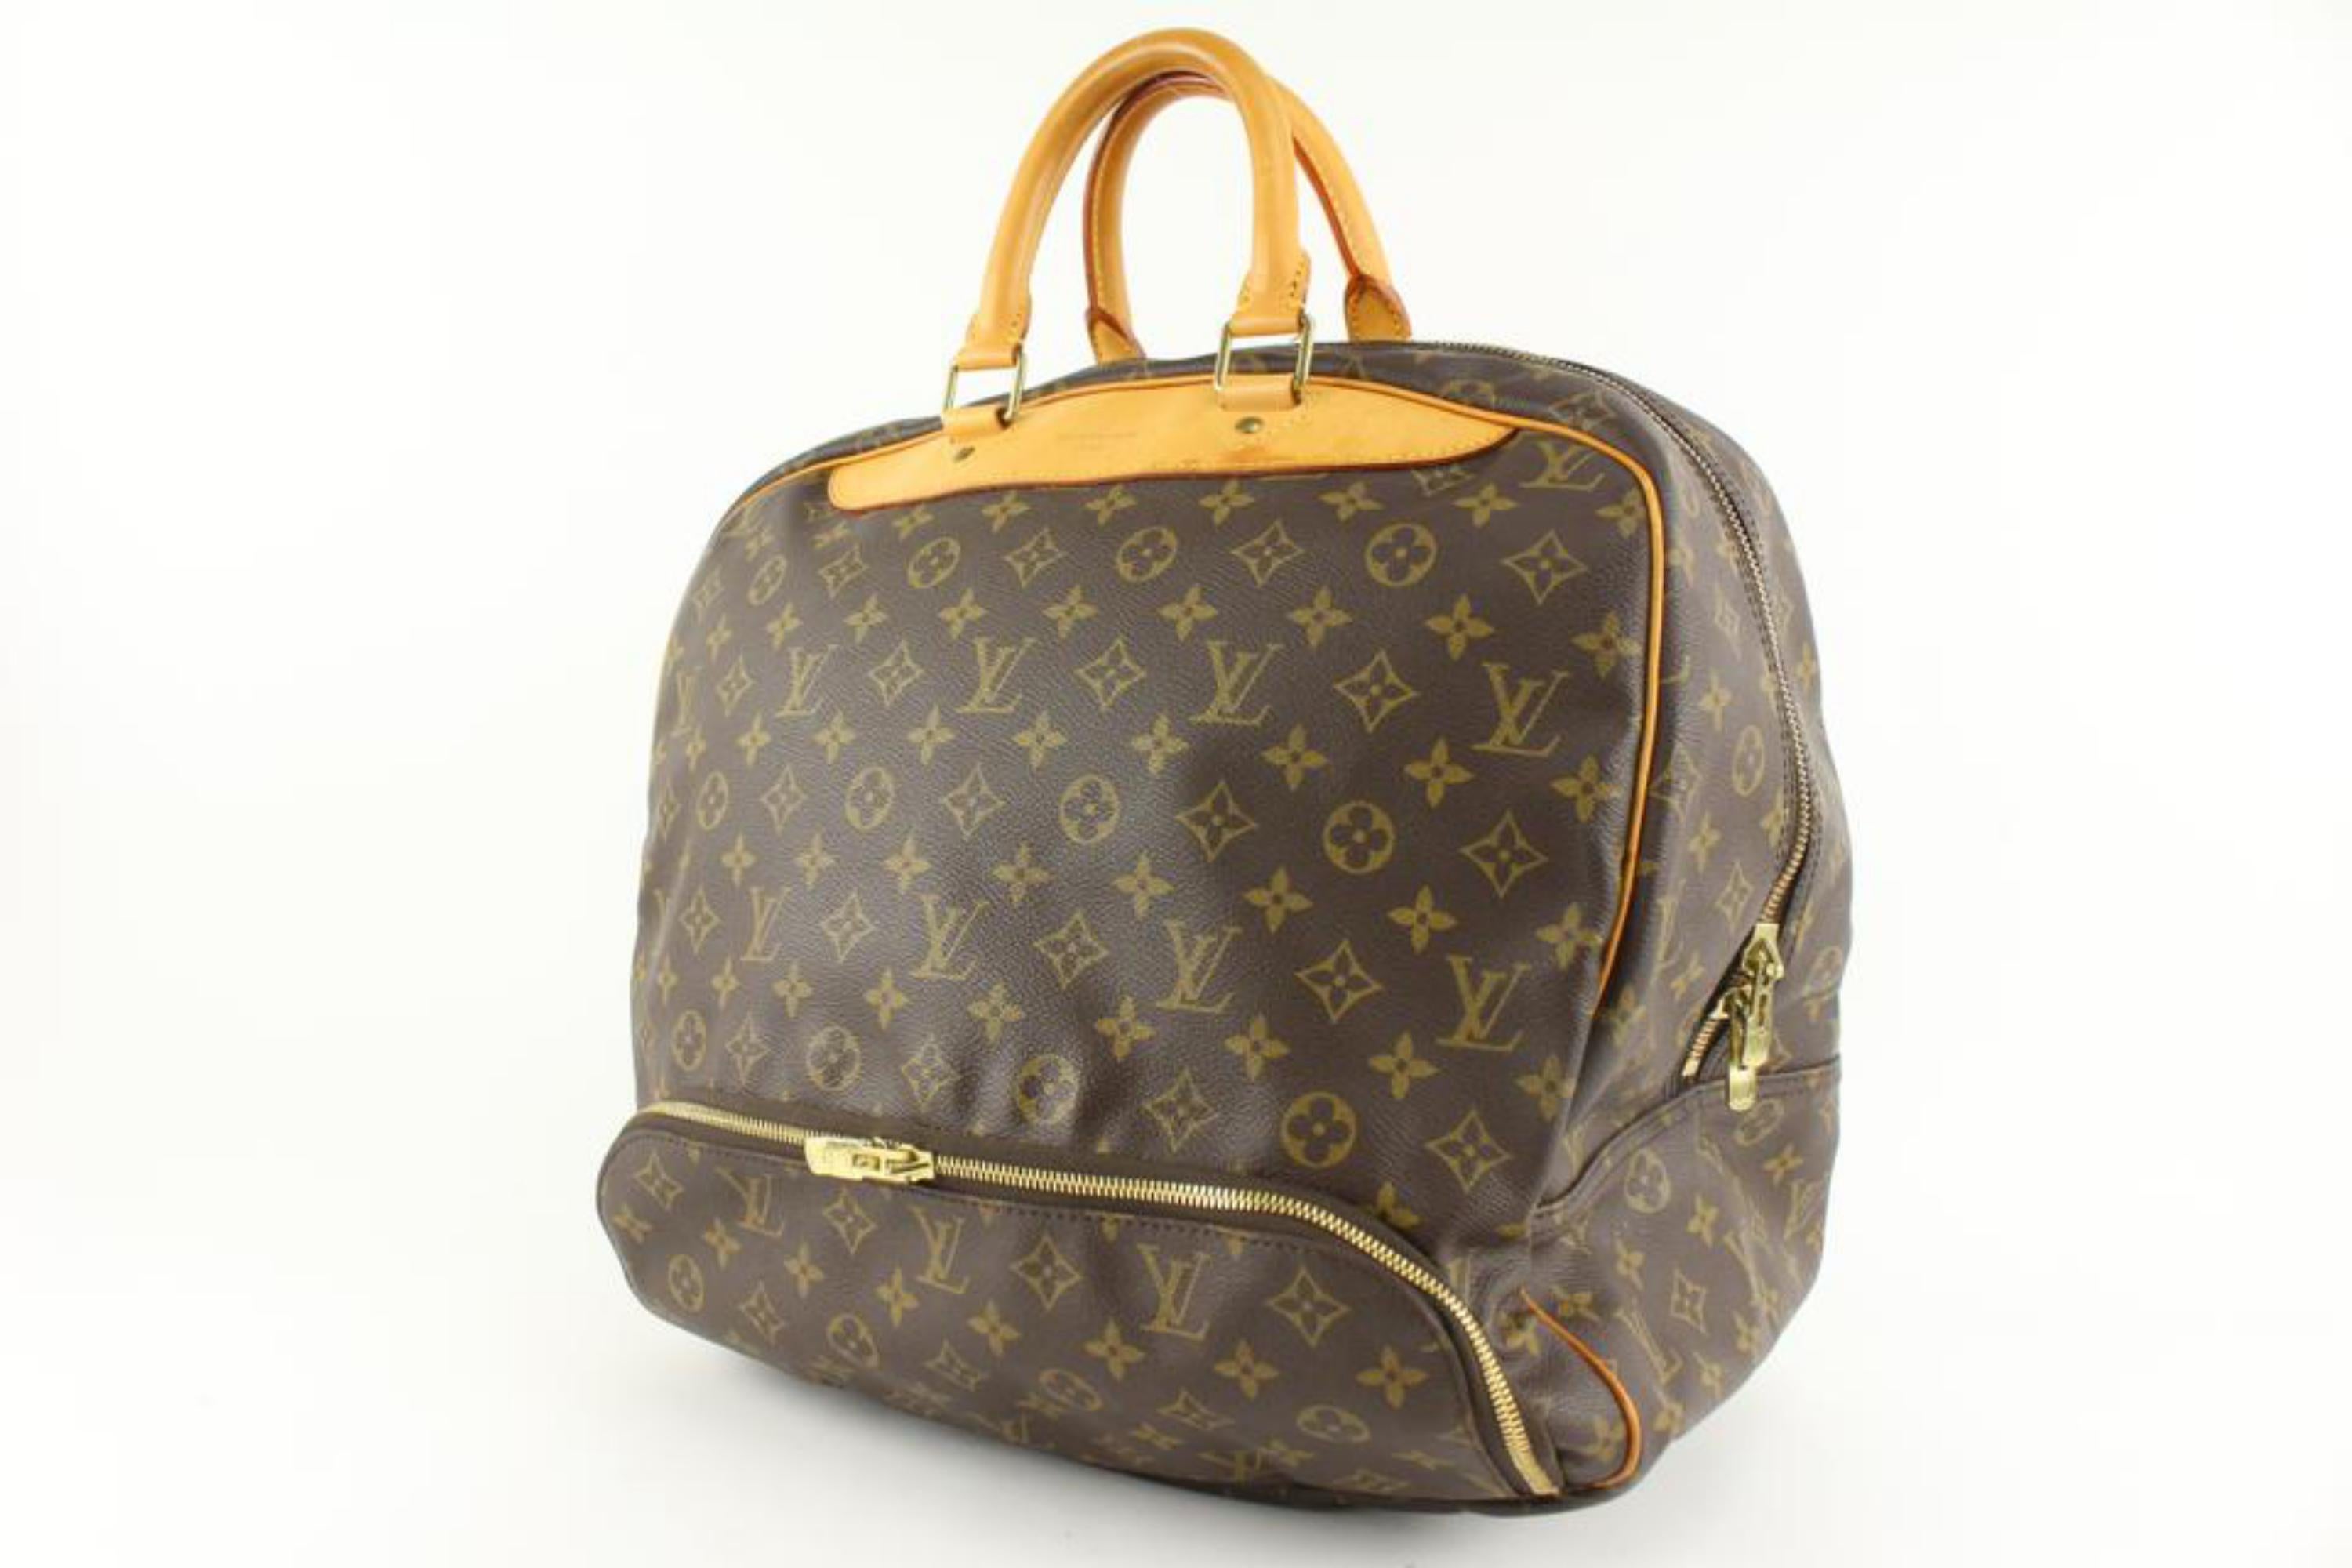 Louis Vuitton Rare Small Size Monogram Sac Evasion Sports Bag 1222lv25
Date Code/Serial Number: VI0927
Made In: France
Measurements: Length:  15